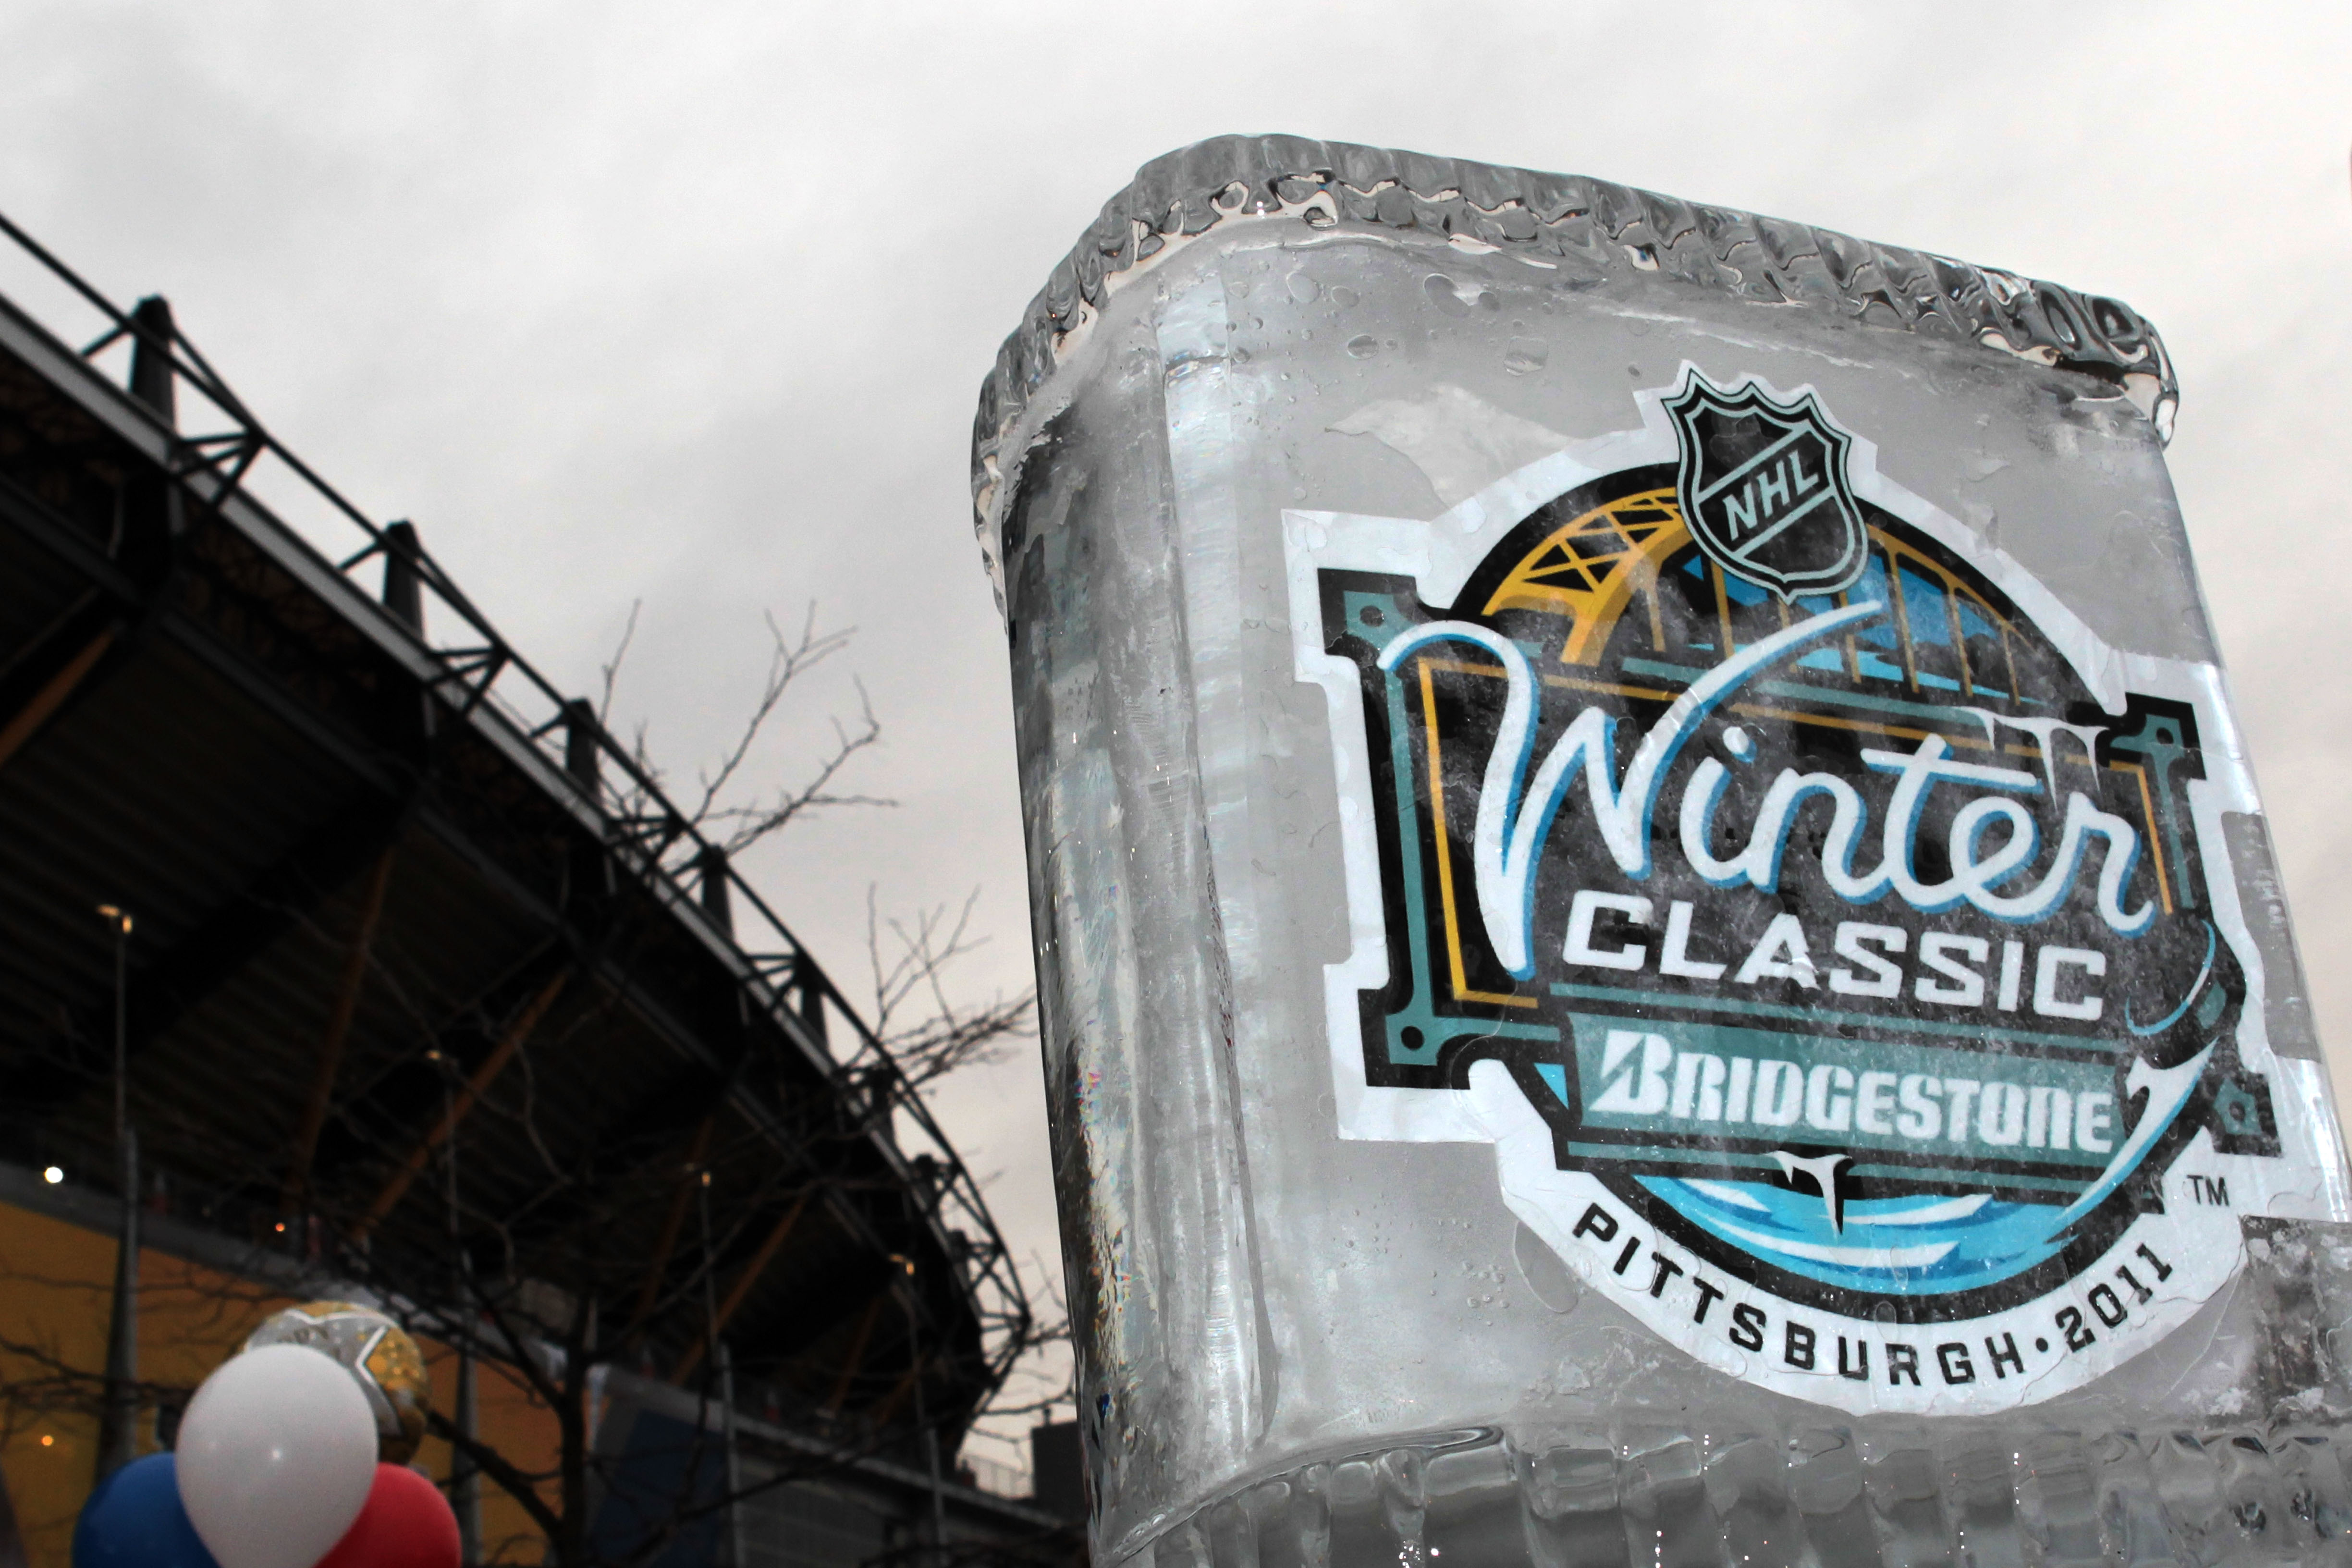 NHL Winter Classic 2011: 7 Things You May Not Have Seen at the